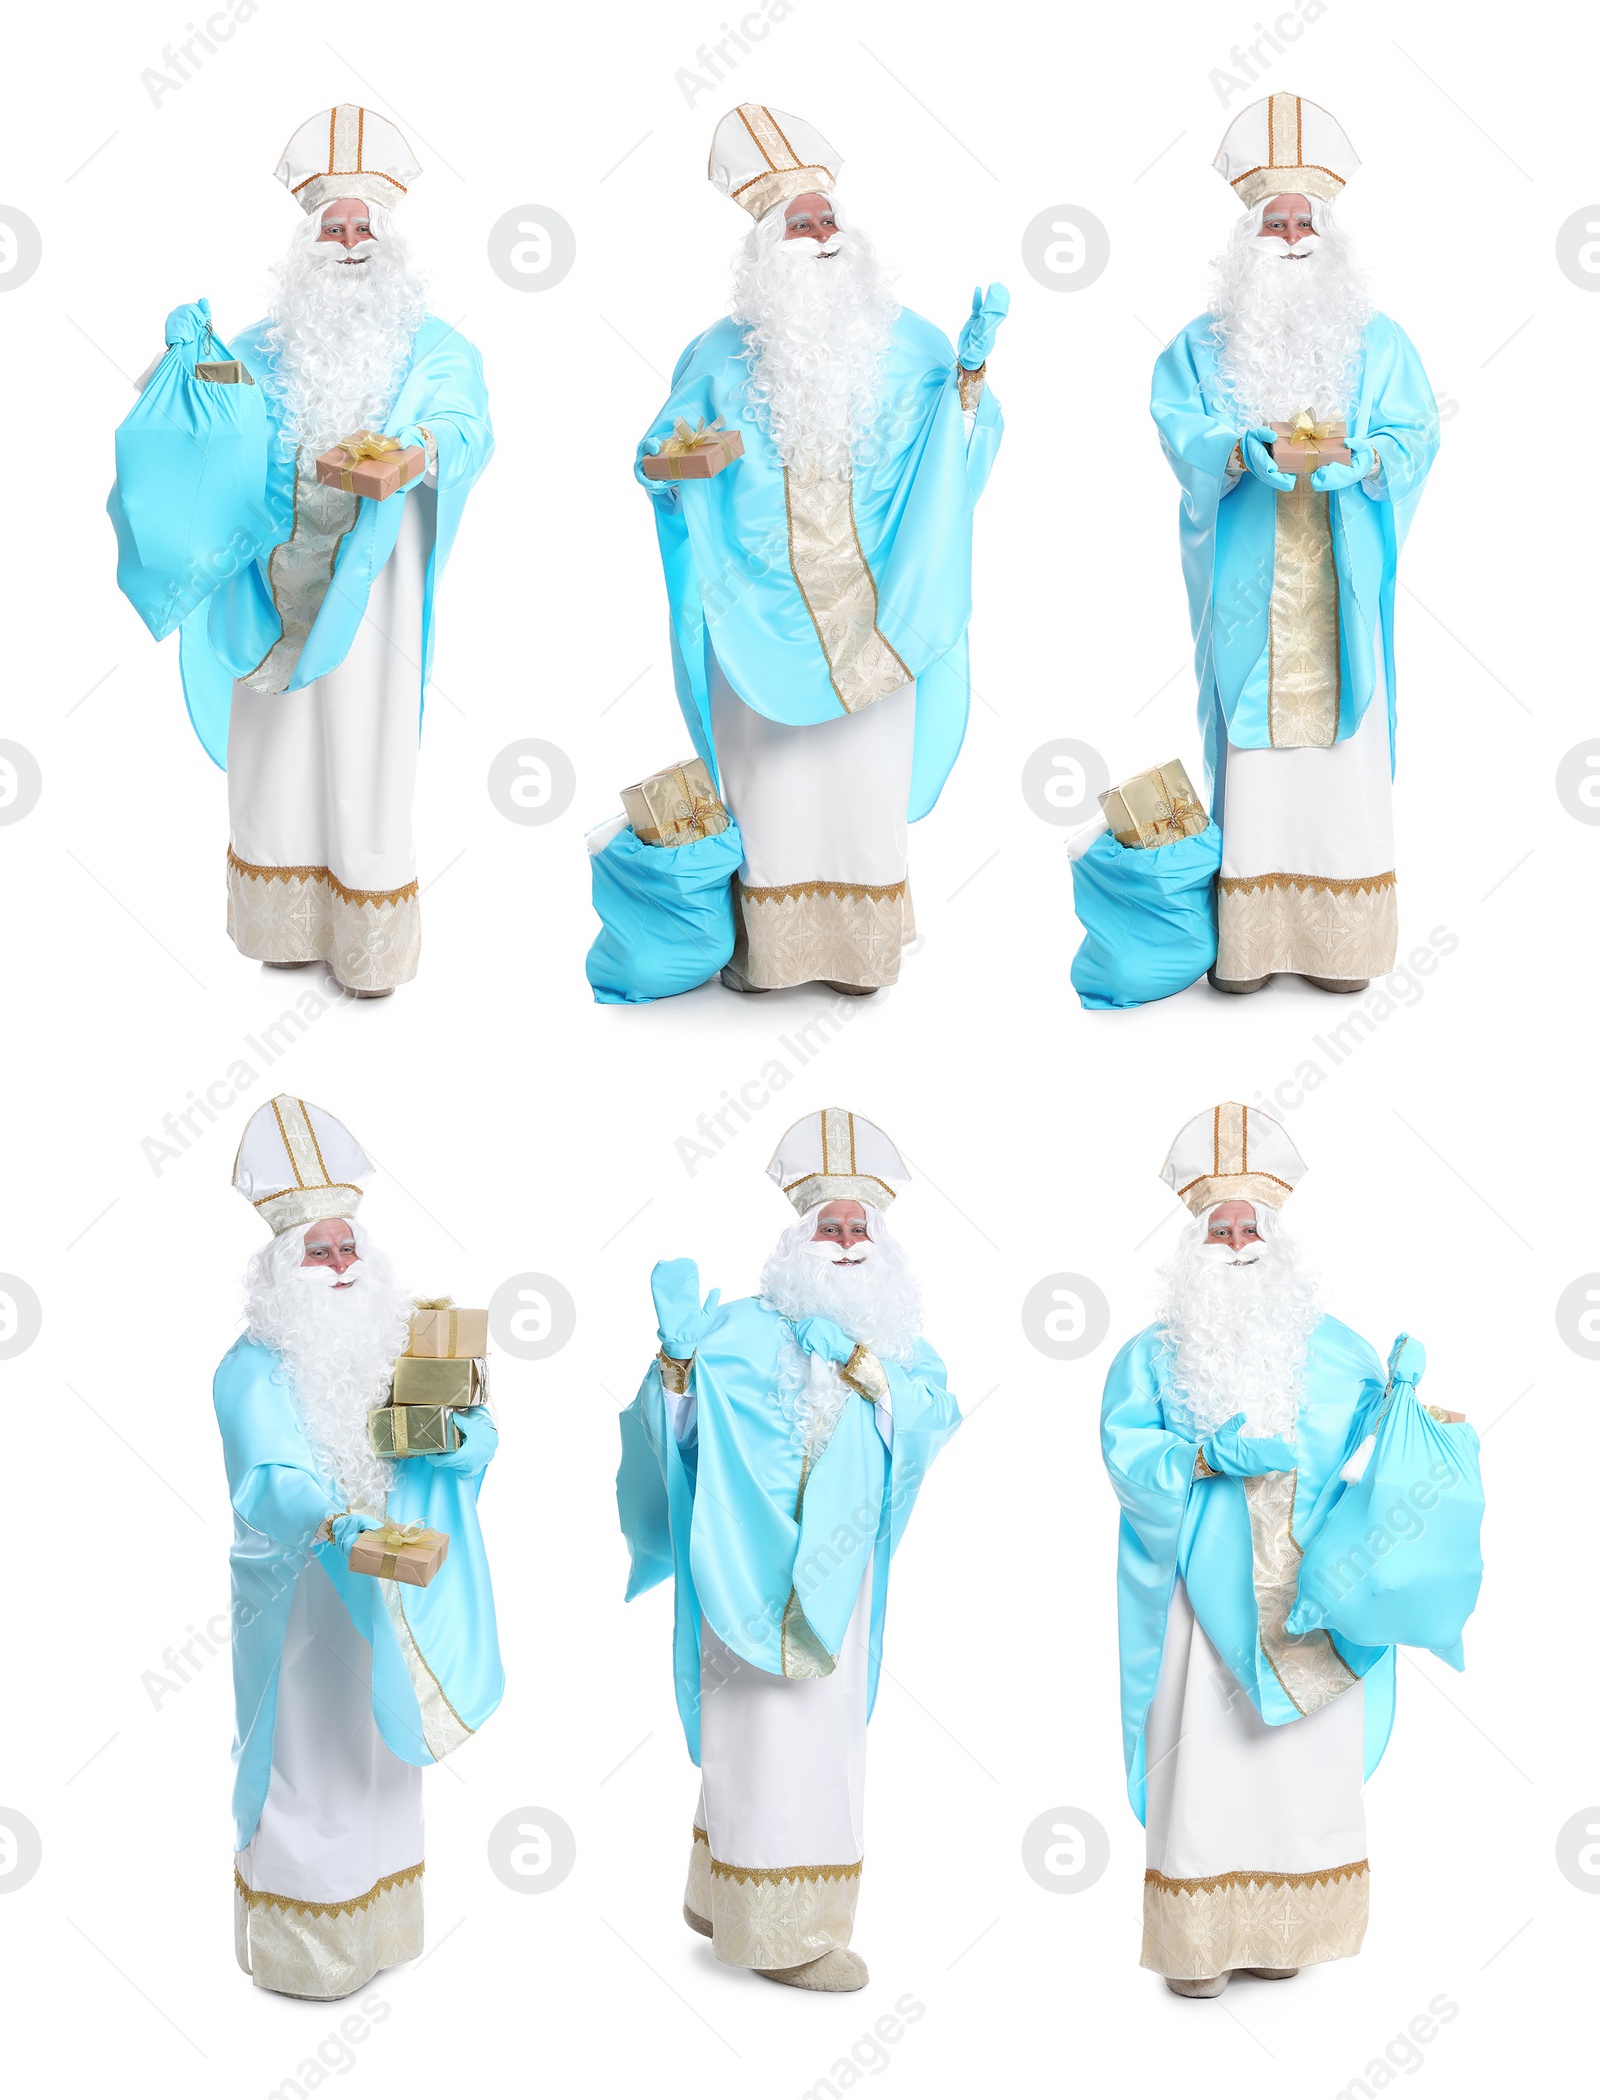 Image of Collage with photos of Saint Nicholas on white background